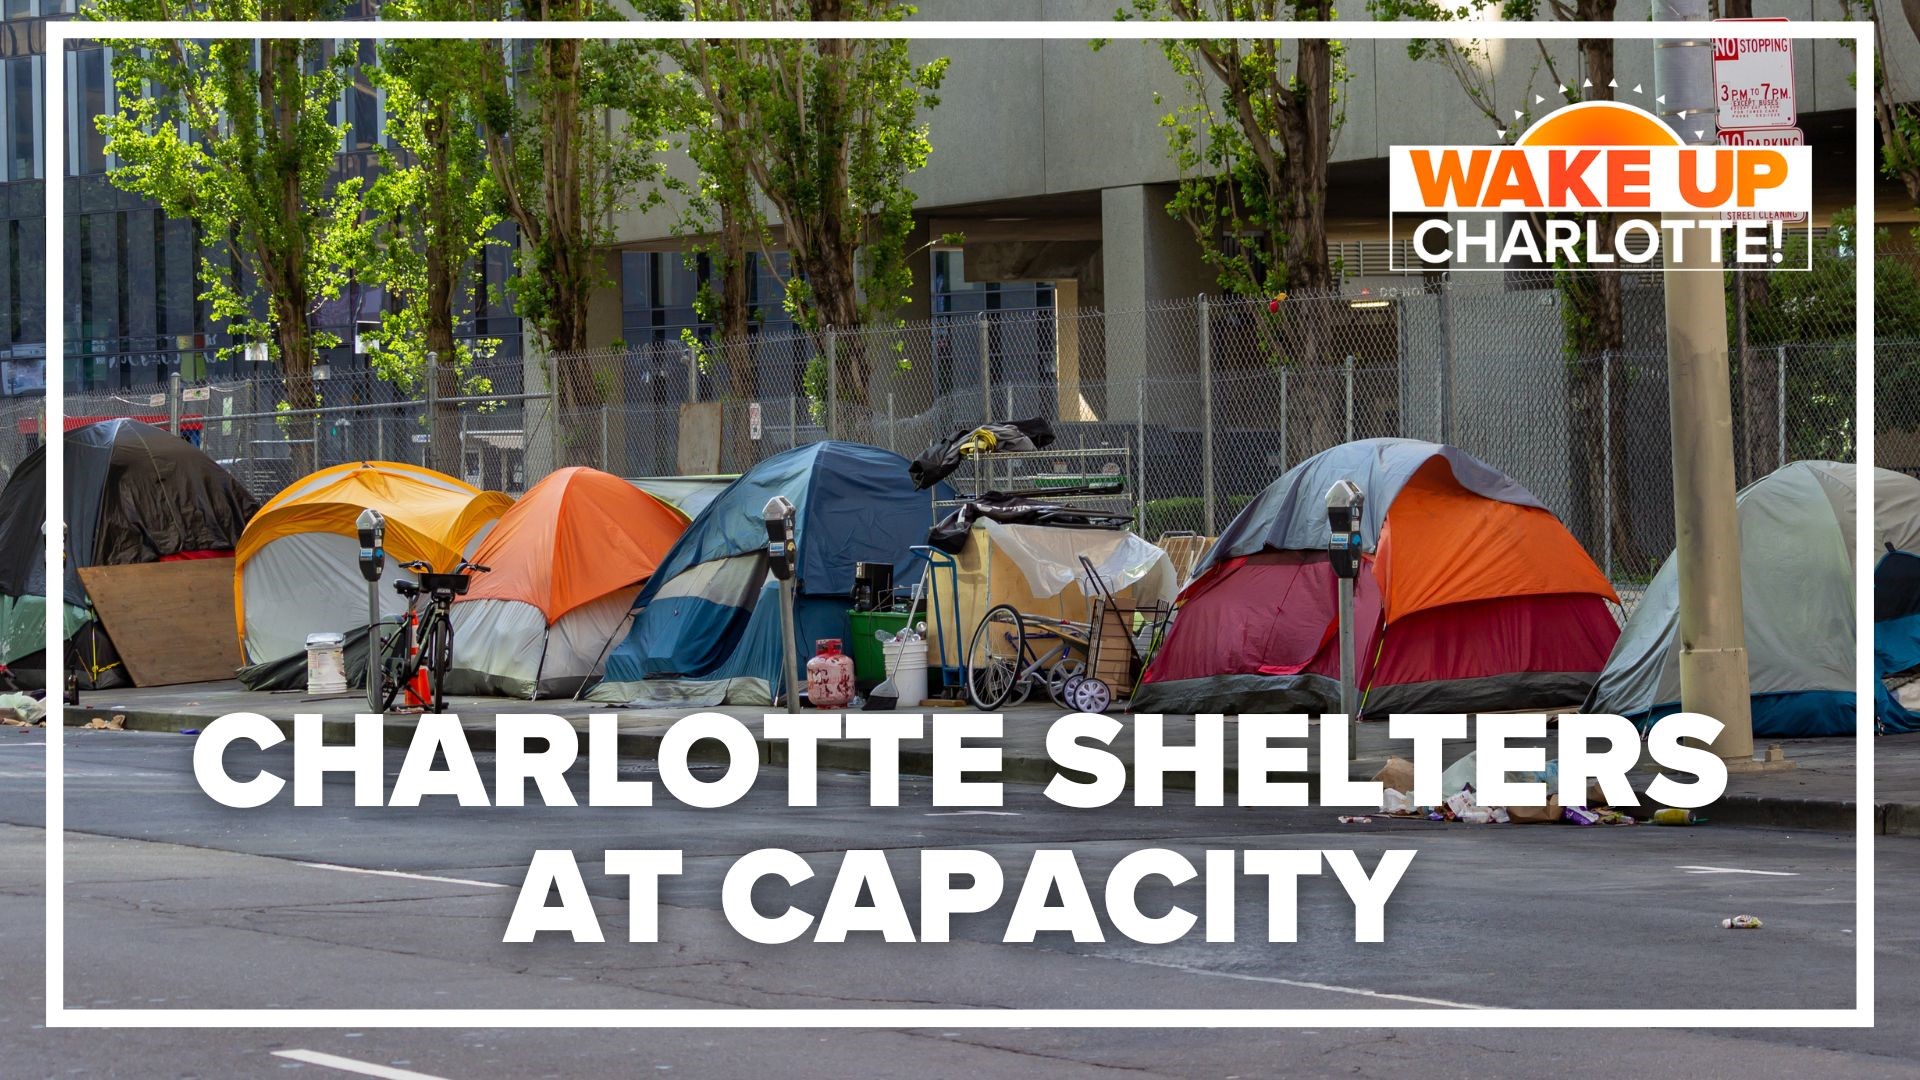 Lower temperatures are leading to a rising number of people looking for a warm place to lay their head. Unfortunately, many shelters are at capacity.